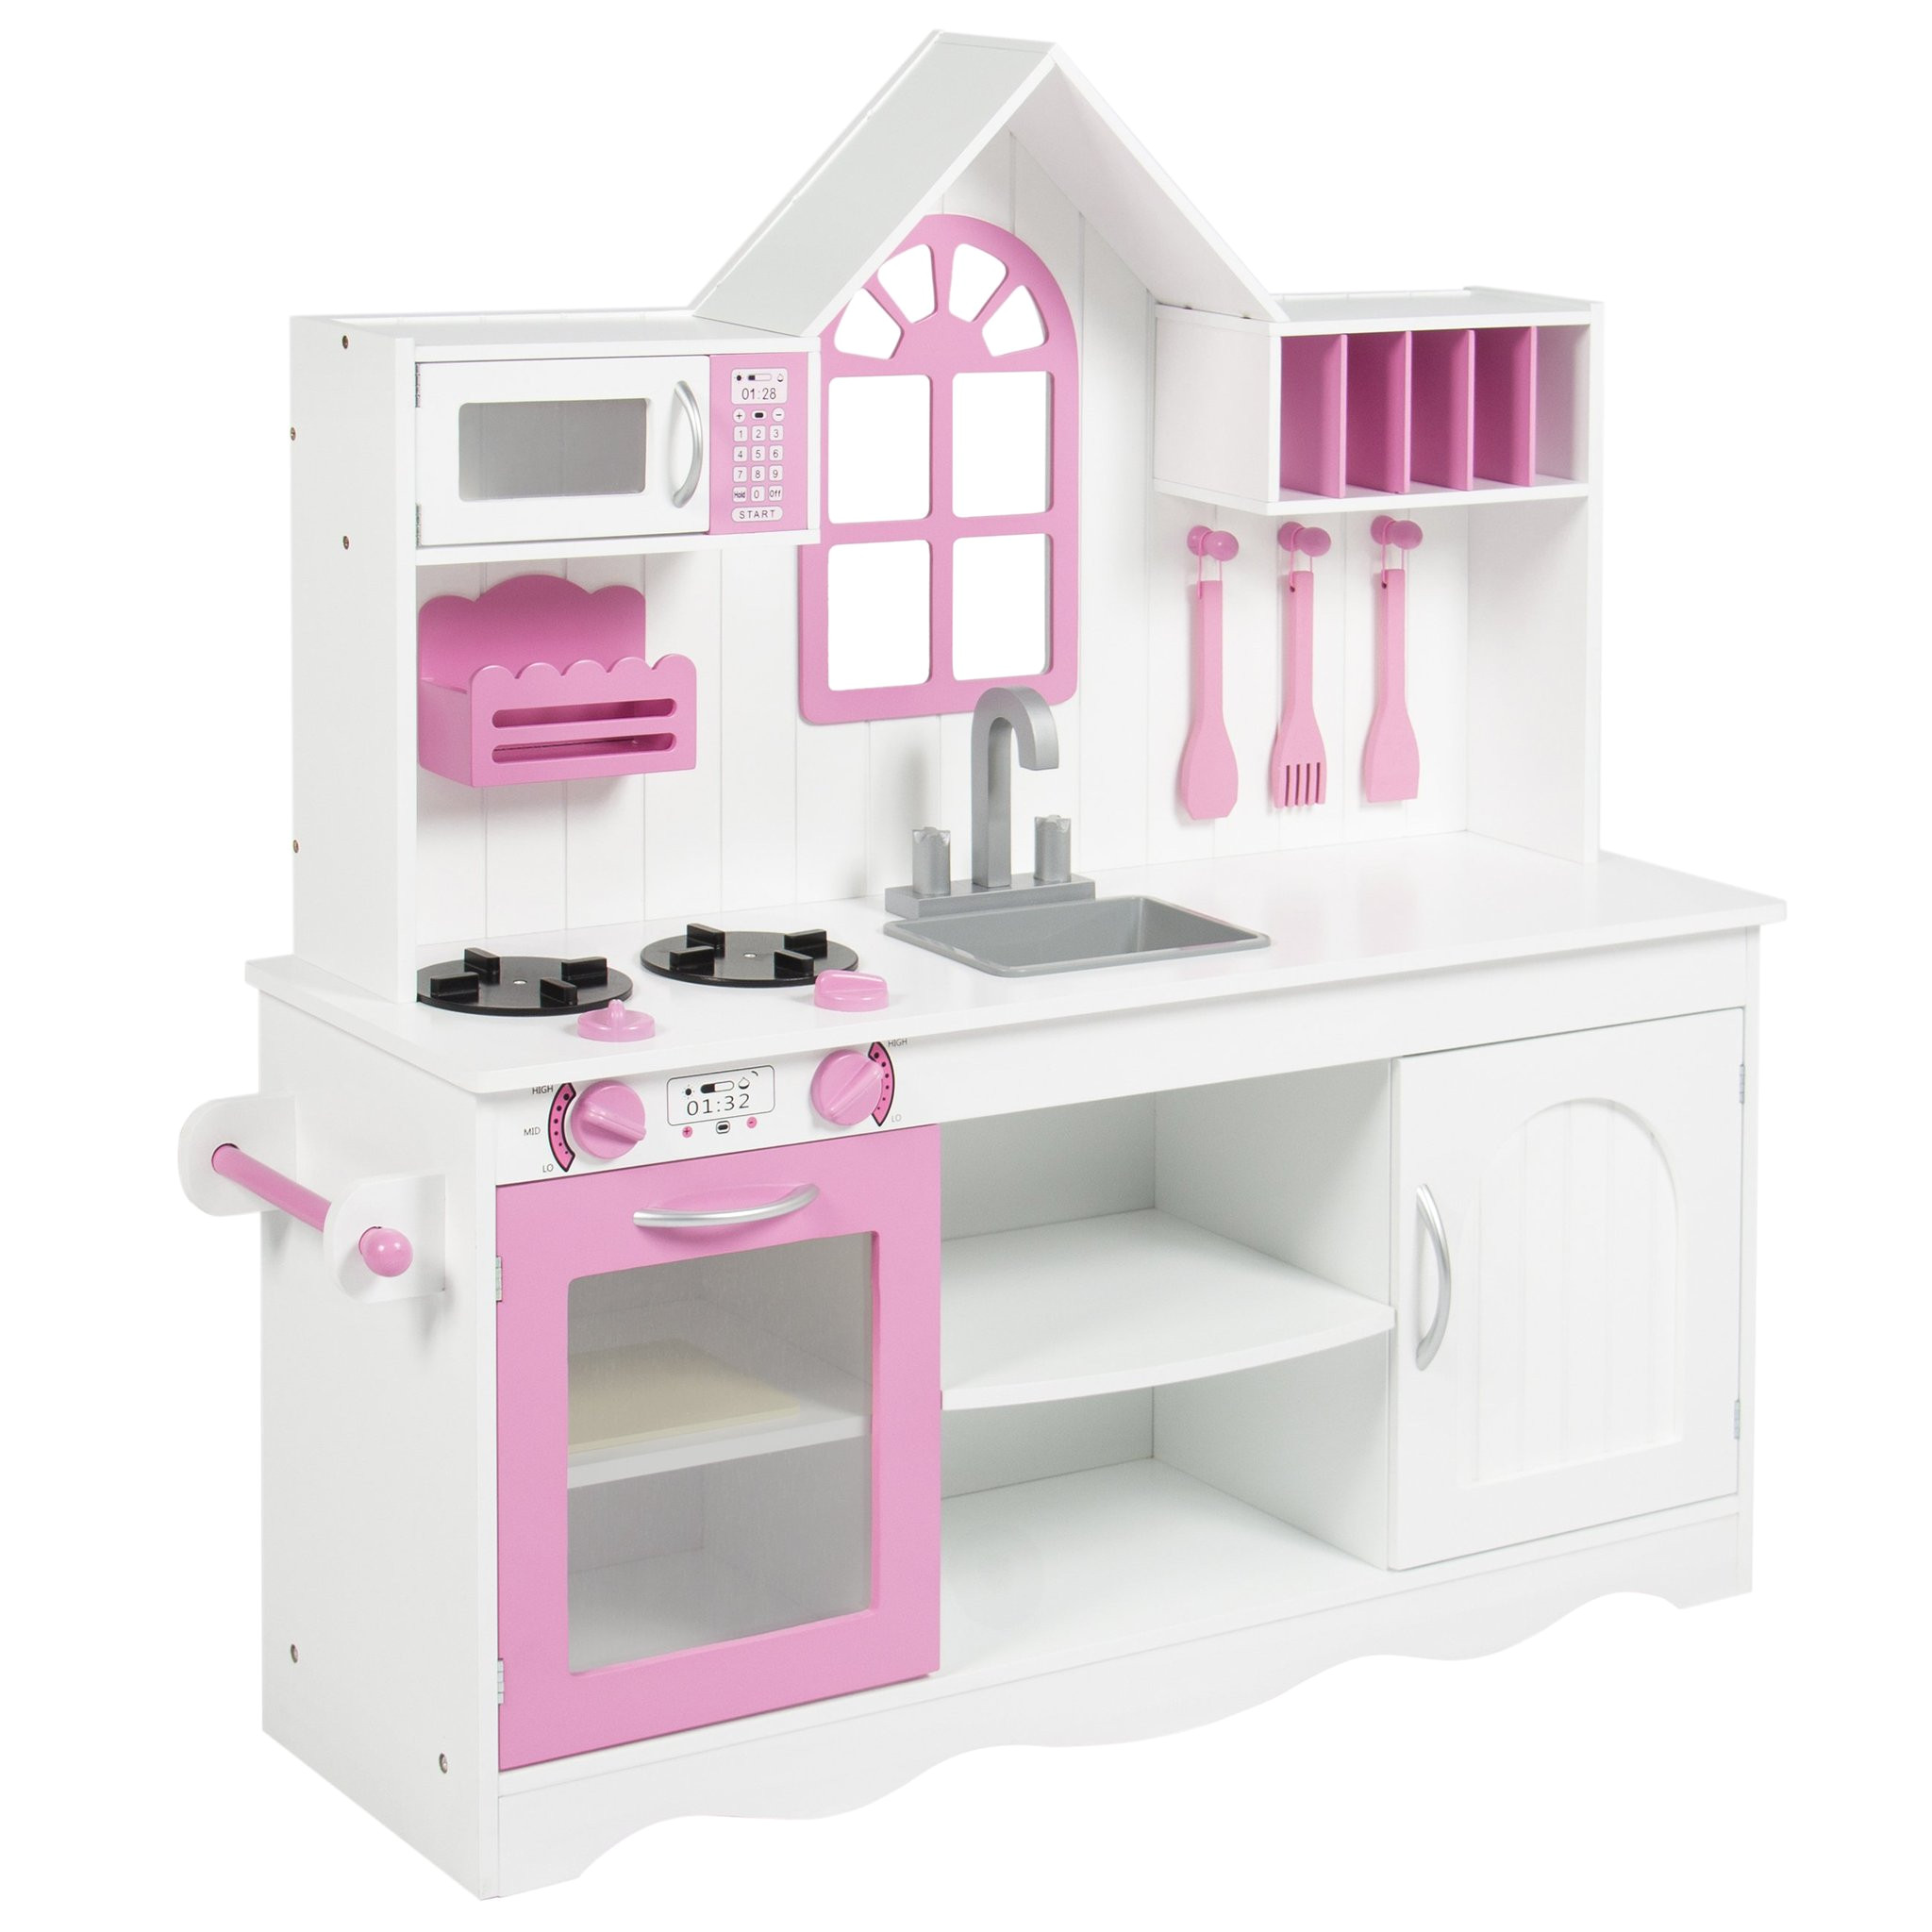 bewitching imaginarium all in one wooden kitchen set and toy wood kitchen home decor gallery